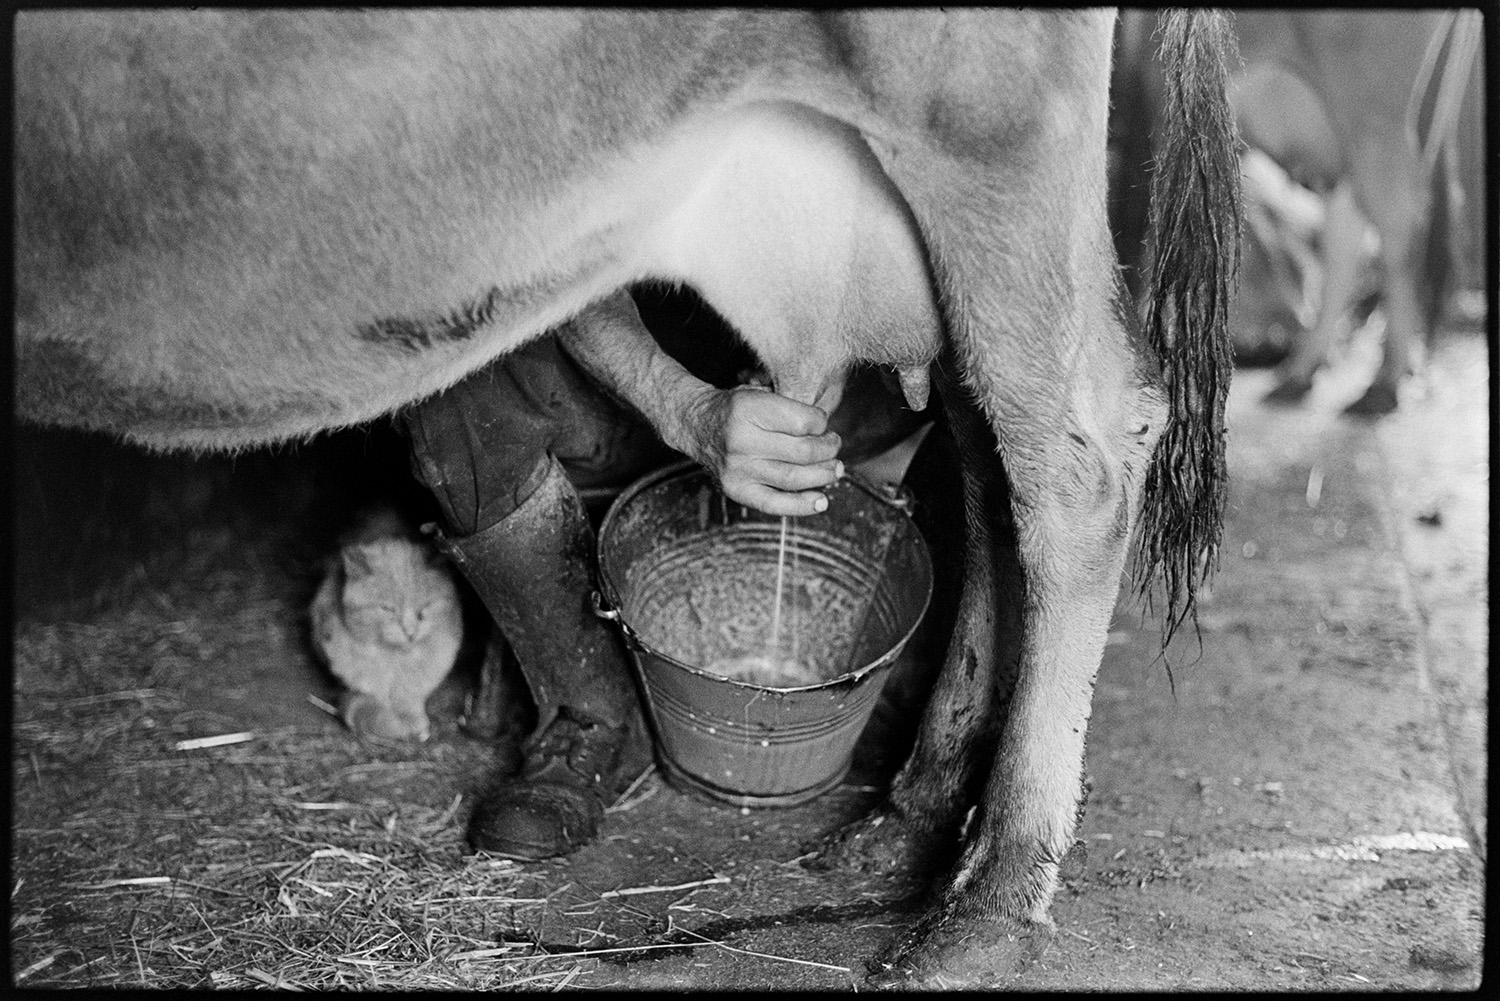 Farmer milking cow by hand and pouring milk into churn. 
[Gordon Sanders milking a cow by hand into a bucket at Reynards Park, Ashreigney. A cat is sat next to him.]